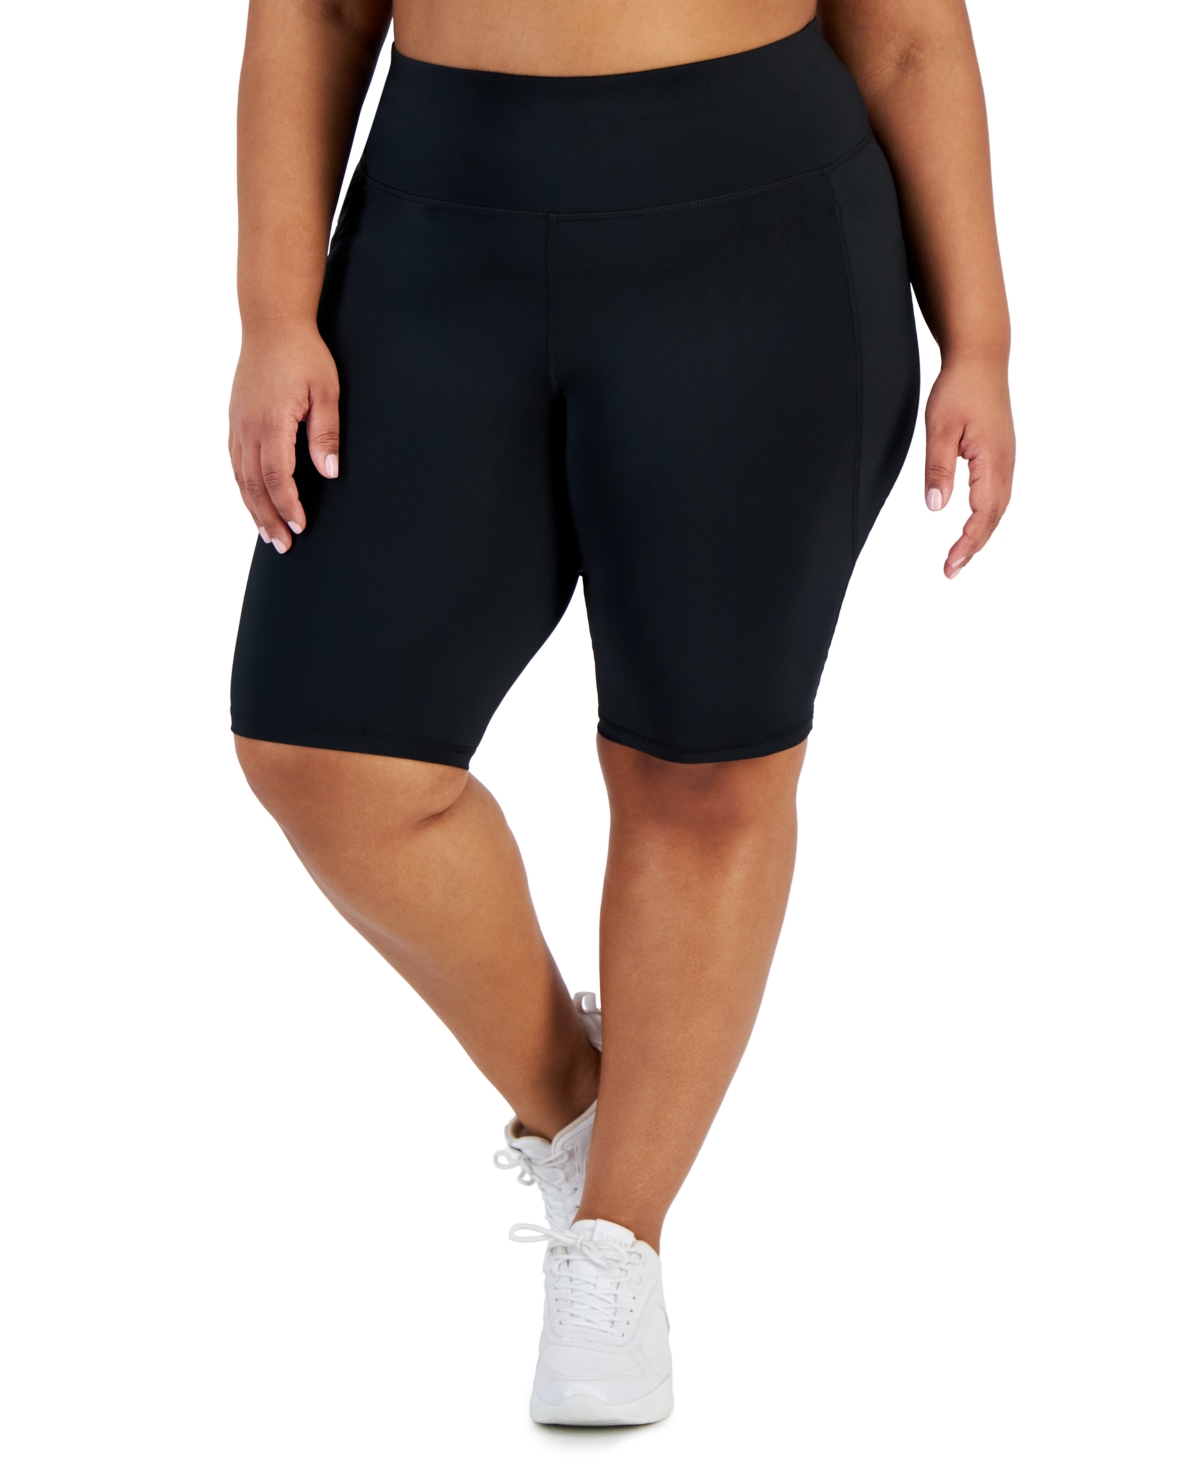 Women's High-Rise Compression Shorts, Created for Macy's - Deep Black